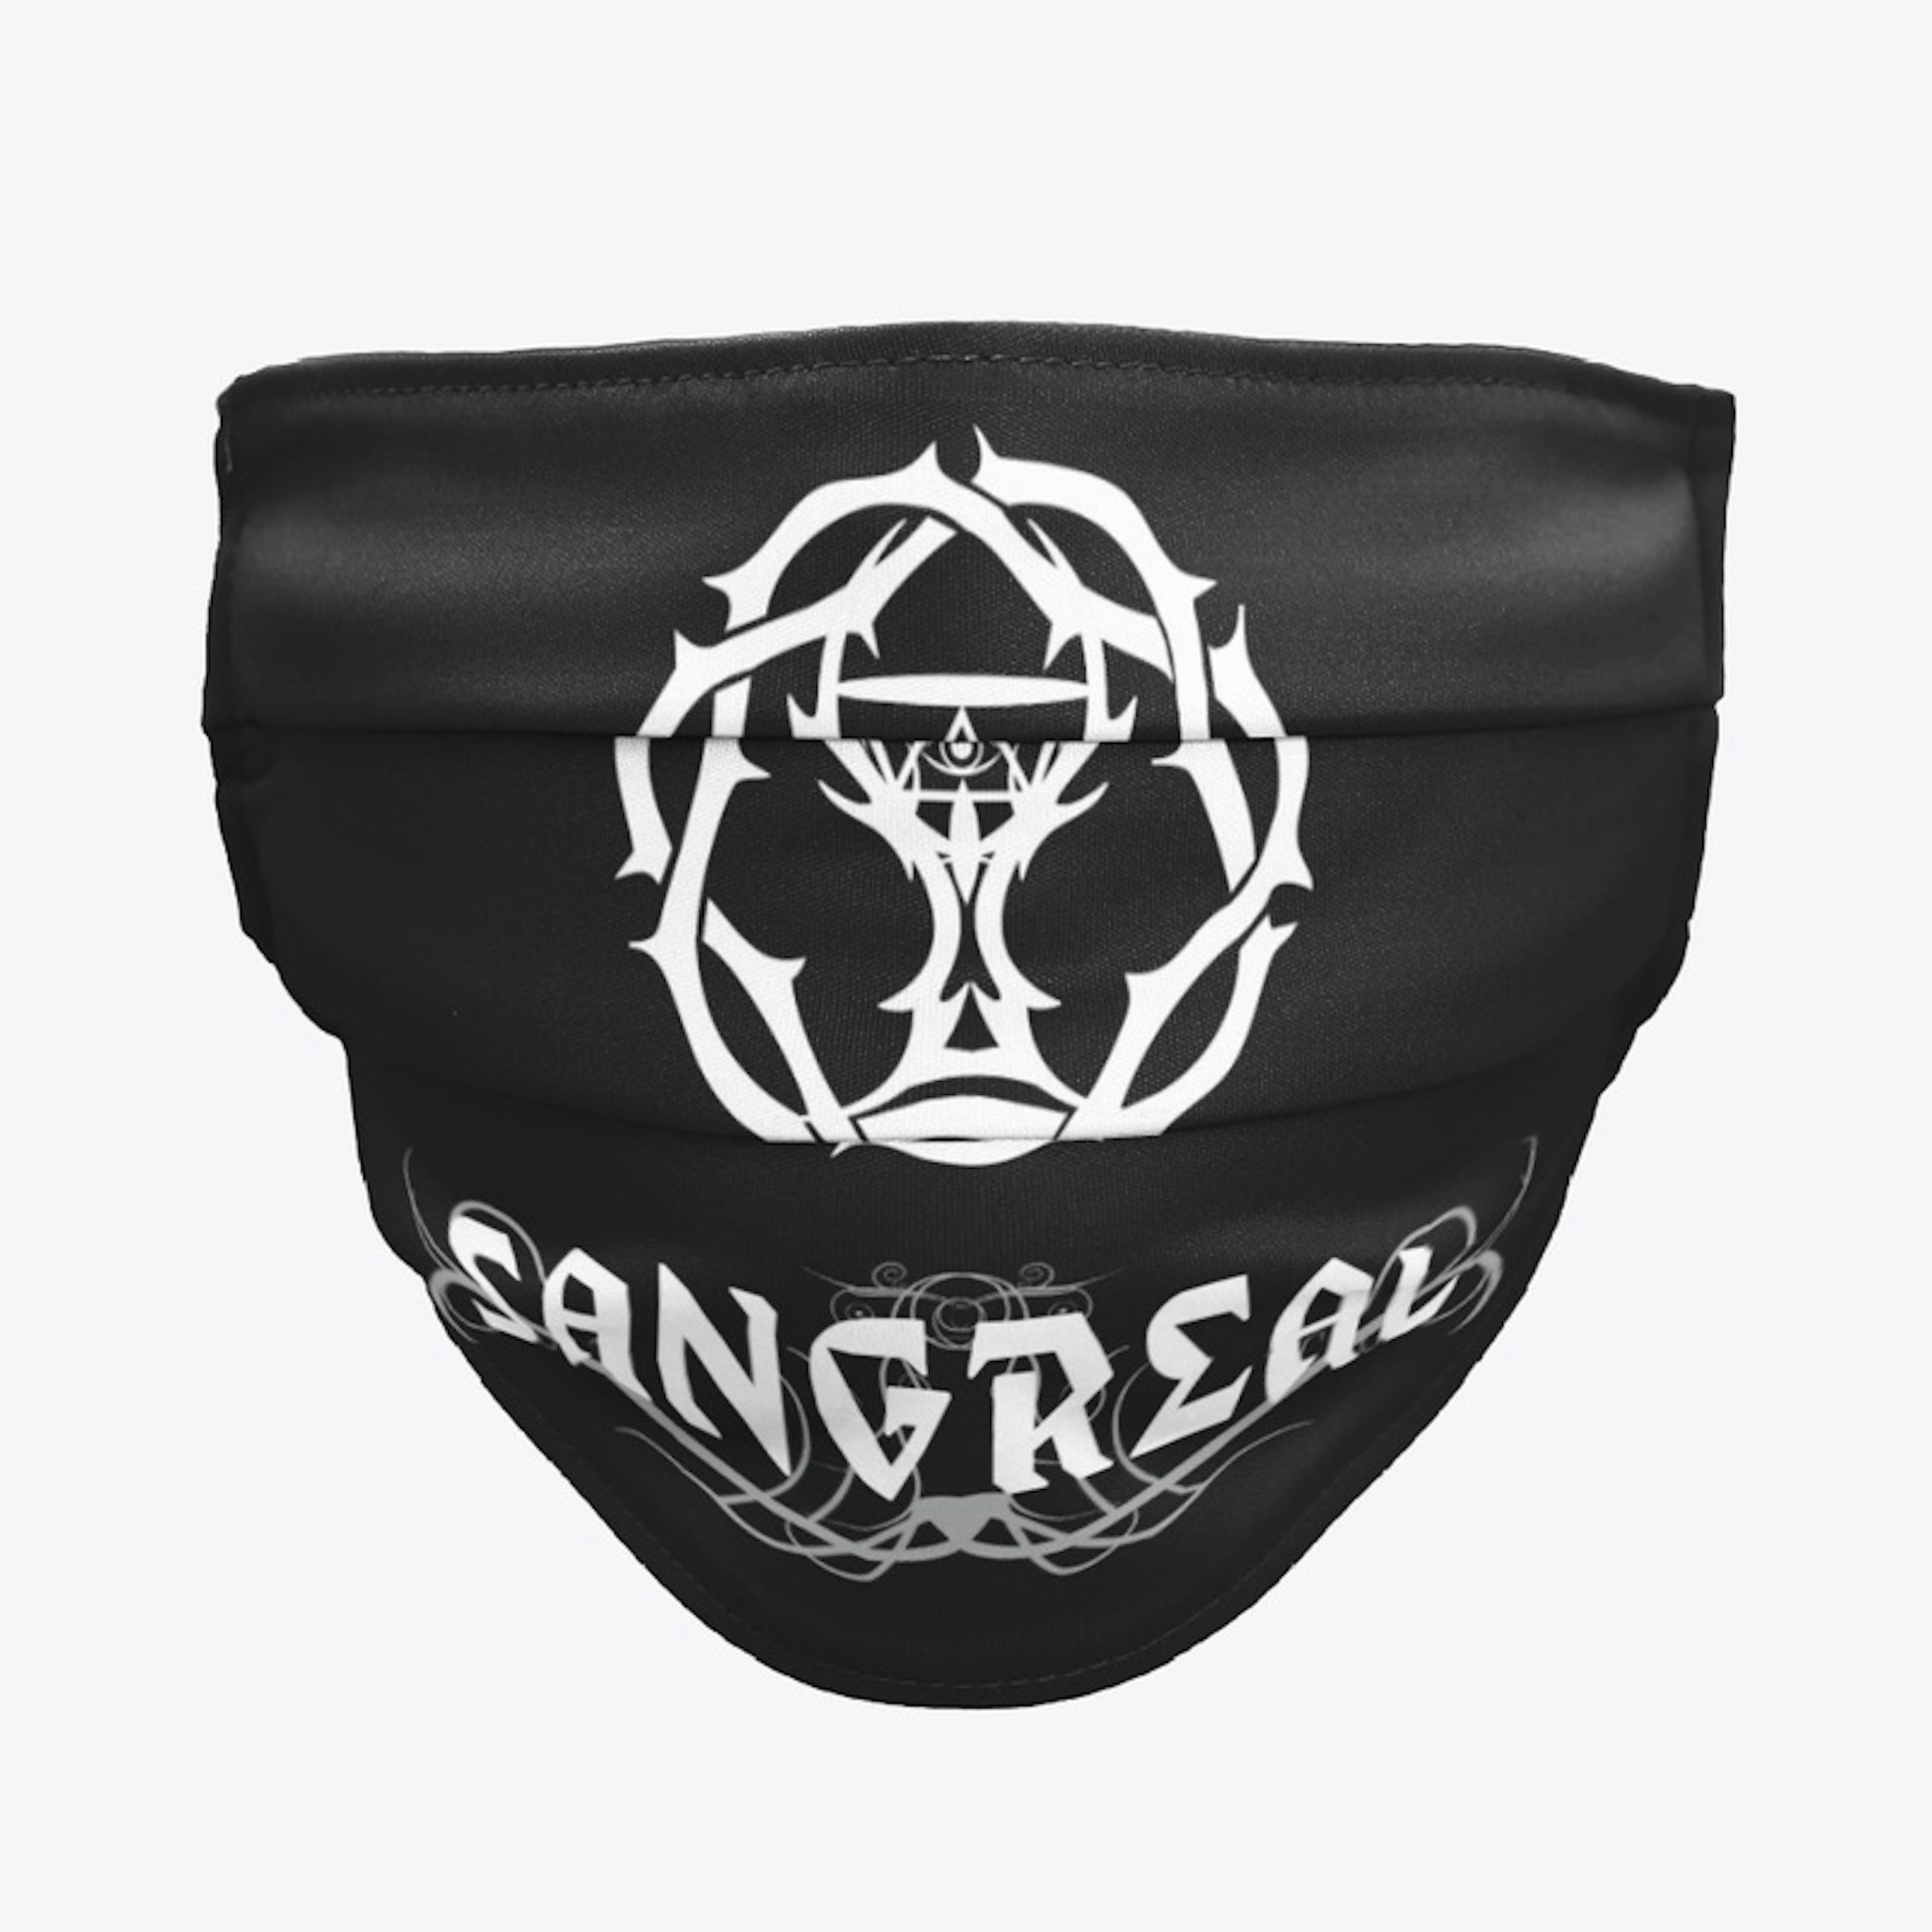 Sangreal Mask Official Merchandise